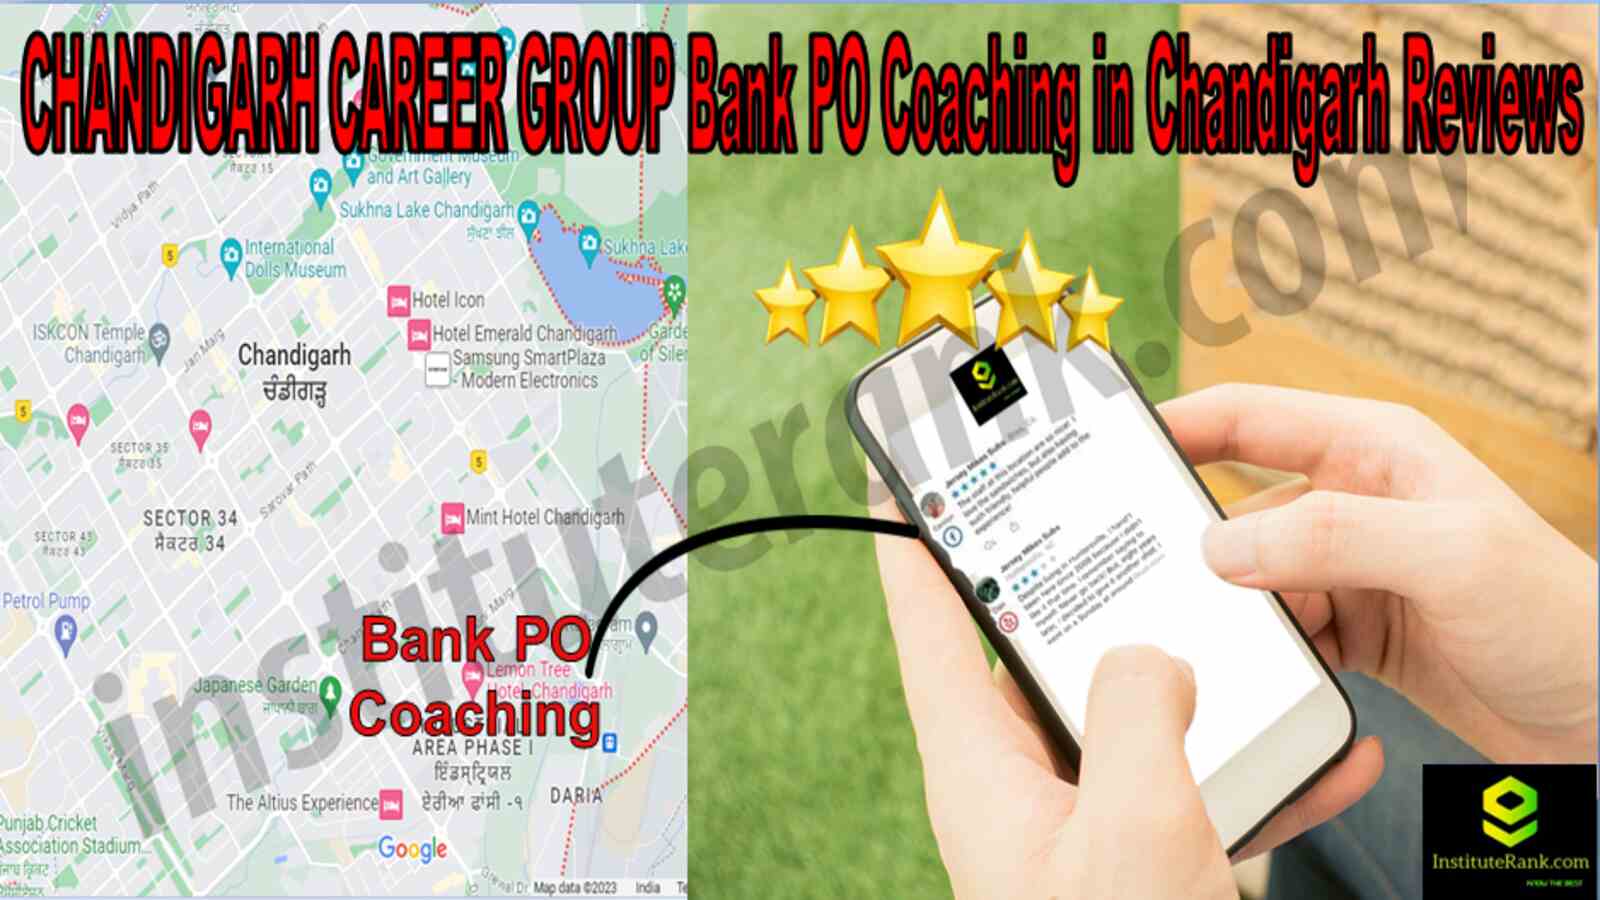 CHANDIGARH CAREER GROUP Bank PO Coaching in Chandigarh Reviews